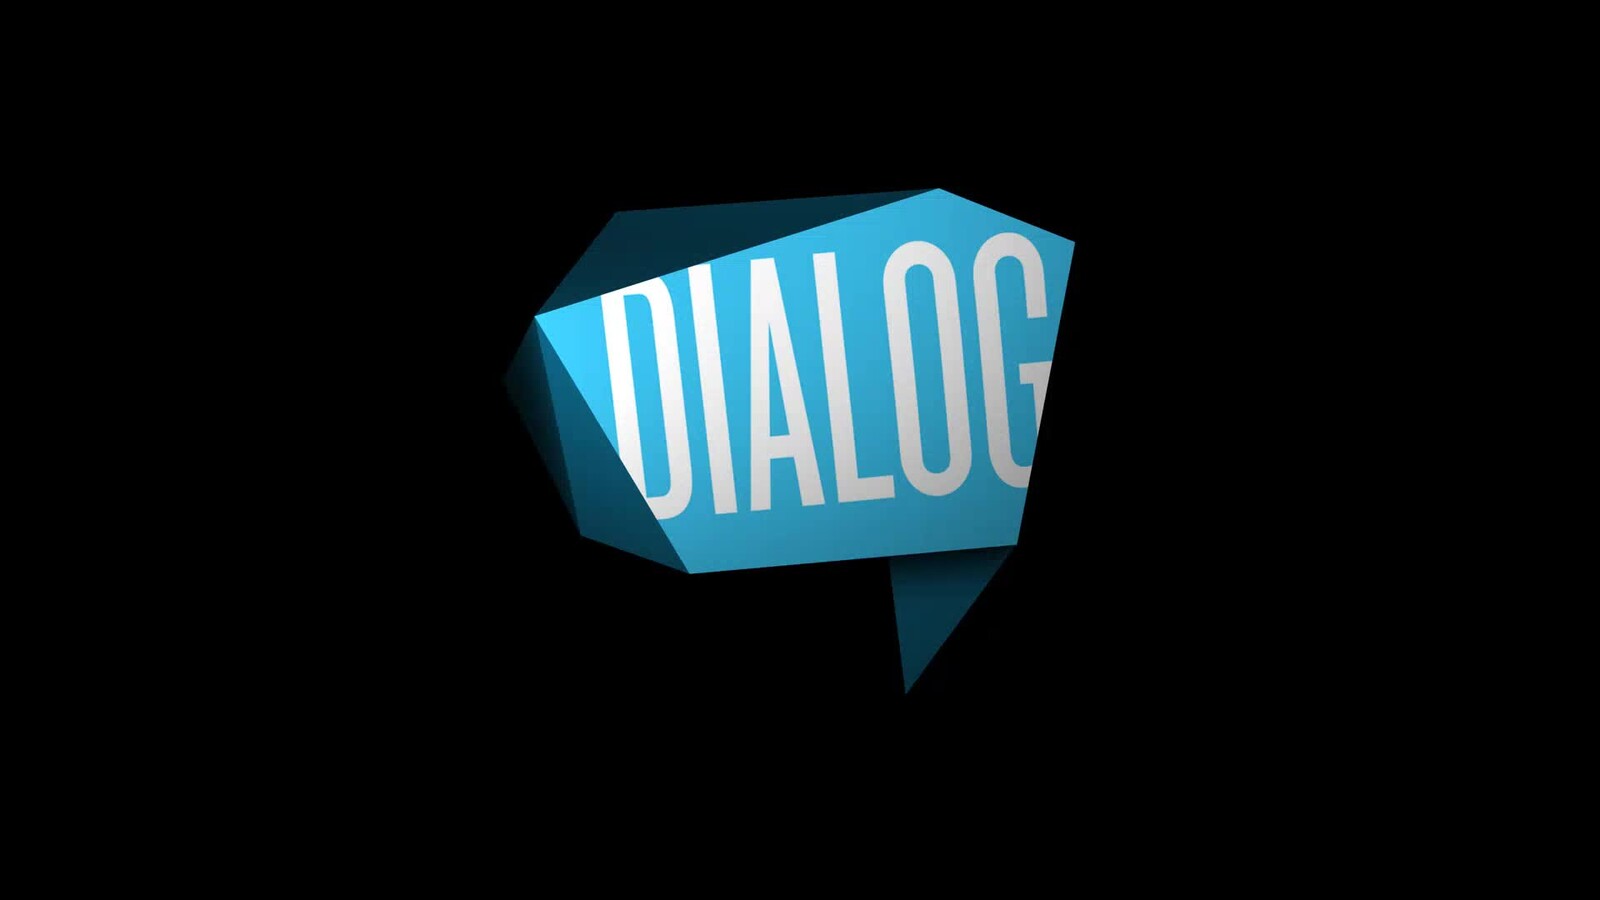 Dialog Motion Graphic